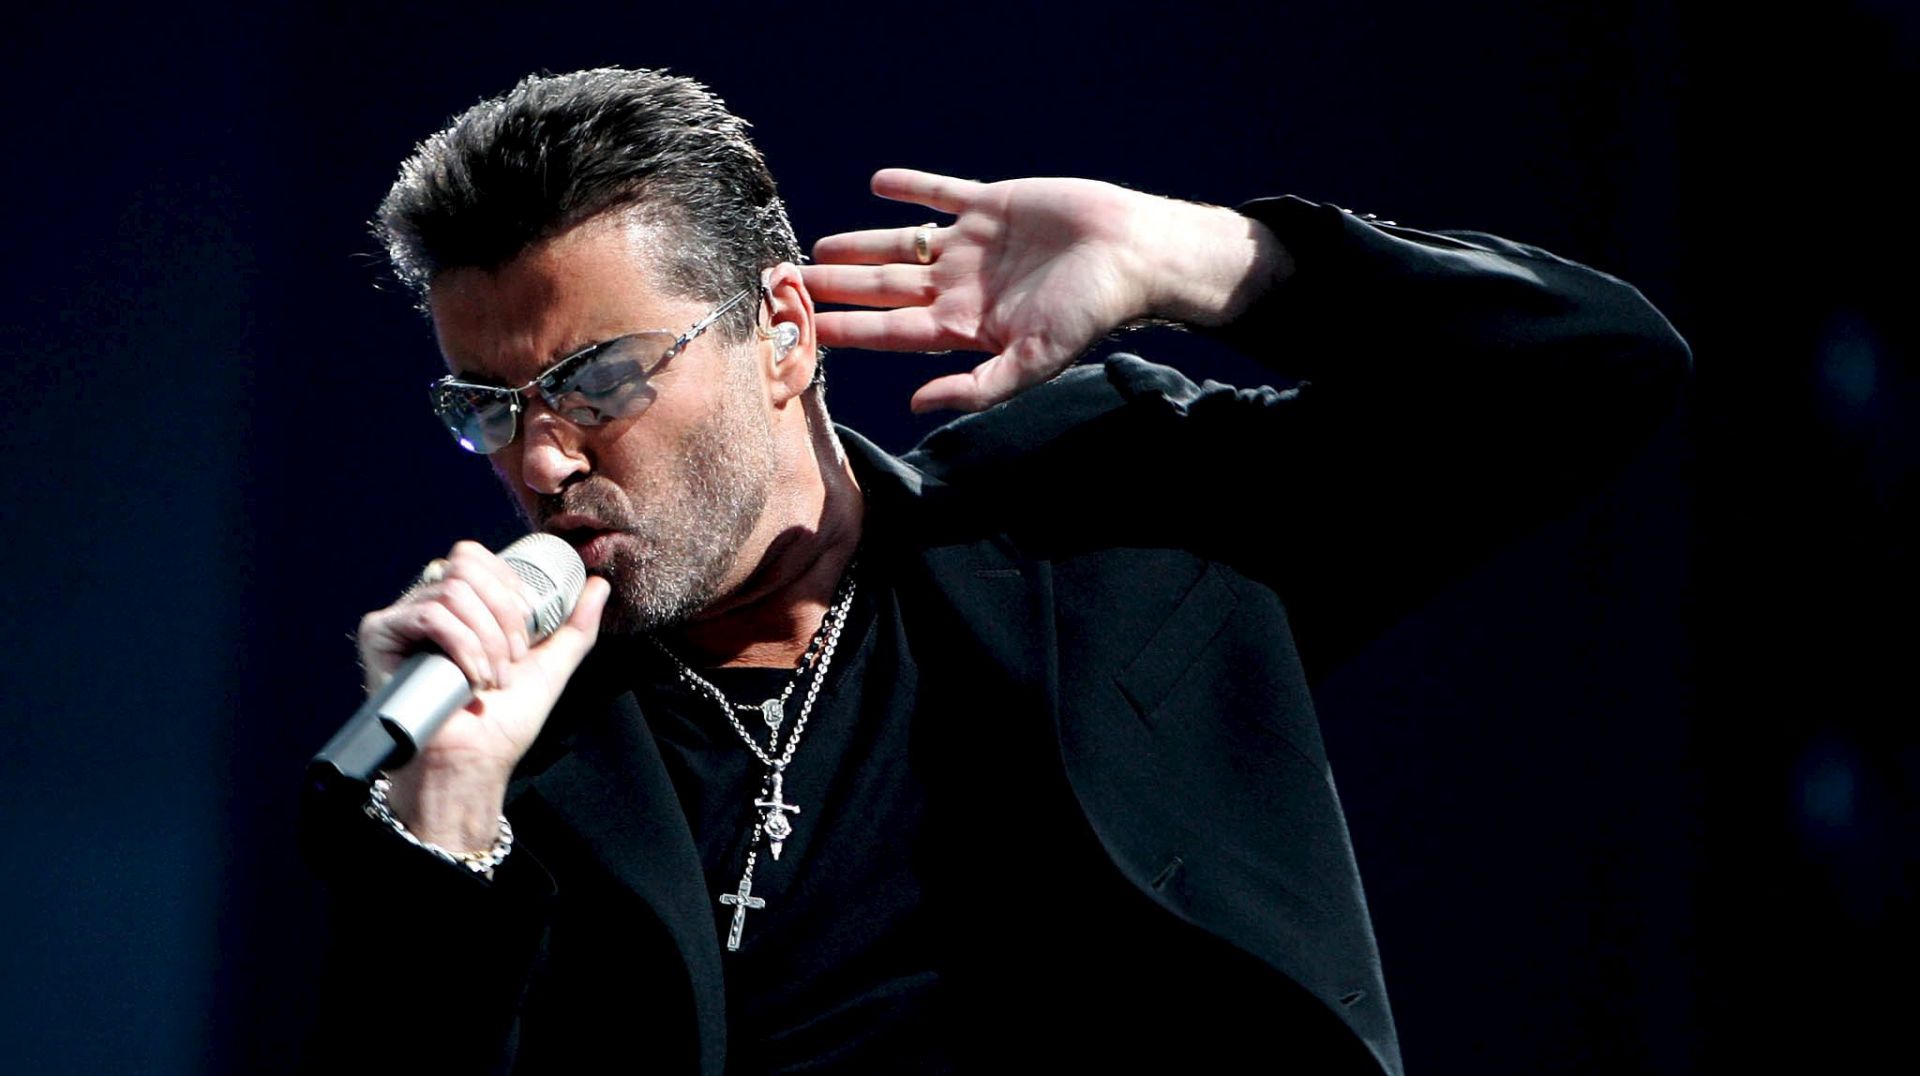 epa05688374 (FILE) - A file picture dated 26 June 2007 shows British recording artist George Michael performing on stage during a concert at the Amsterdam Arena, Amsterdam, The Netherlands. According to reports on late 25 December 2016, British popstar George Michael has died peacefully at home at the age of 53, his publicist has announced.  EPA/EVERT ELZINGA